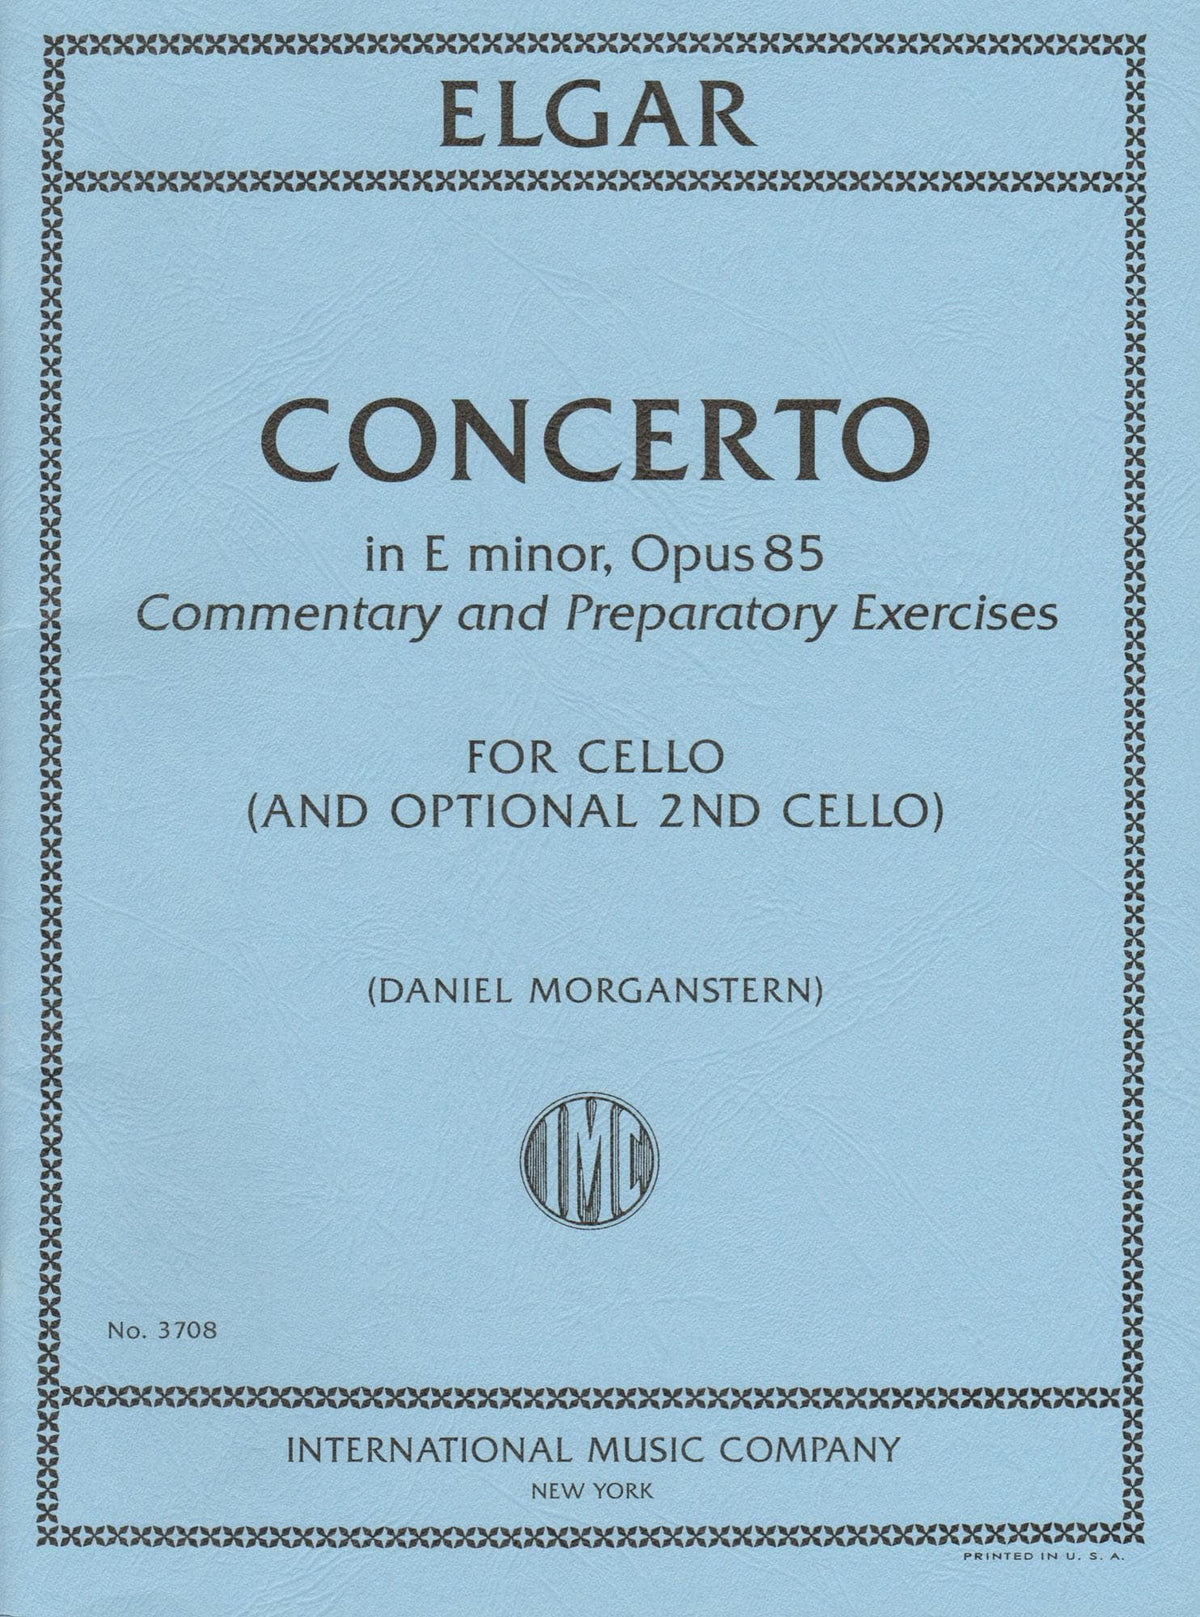 Elgar, Edward - Concerto in E minor - for Cello - with Optional 2nd Cello, Commentary and Preparatory Exercises by Daniel Morganstern - International